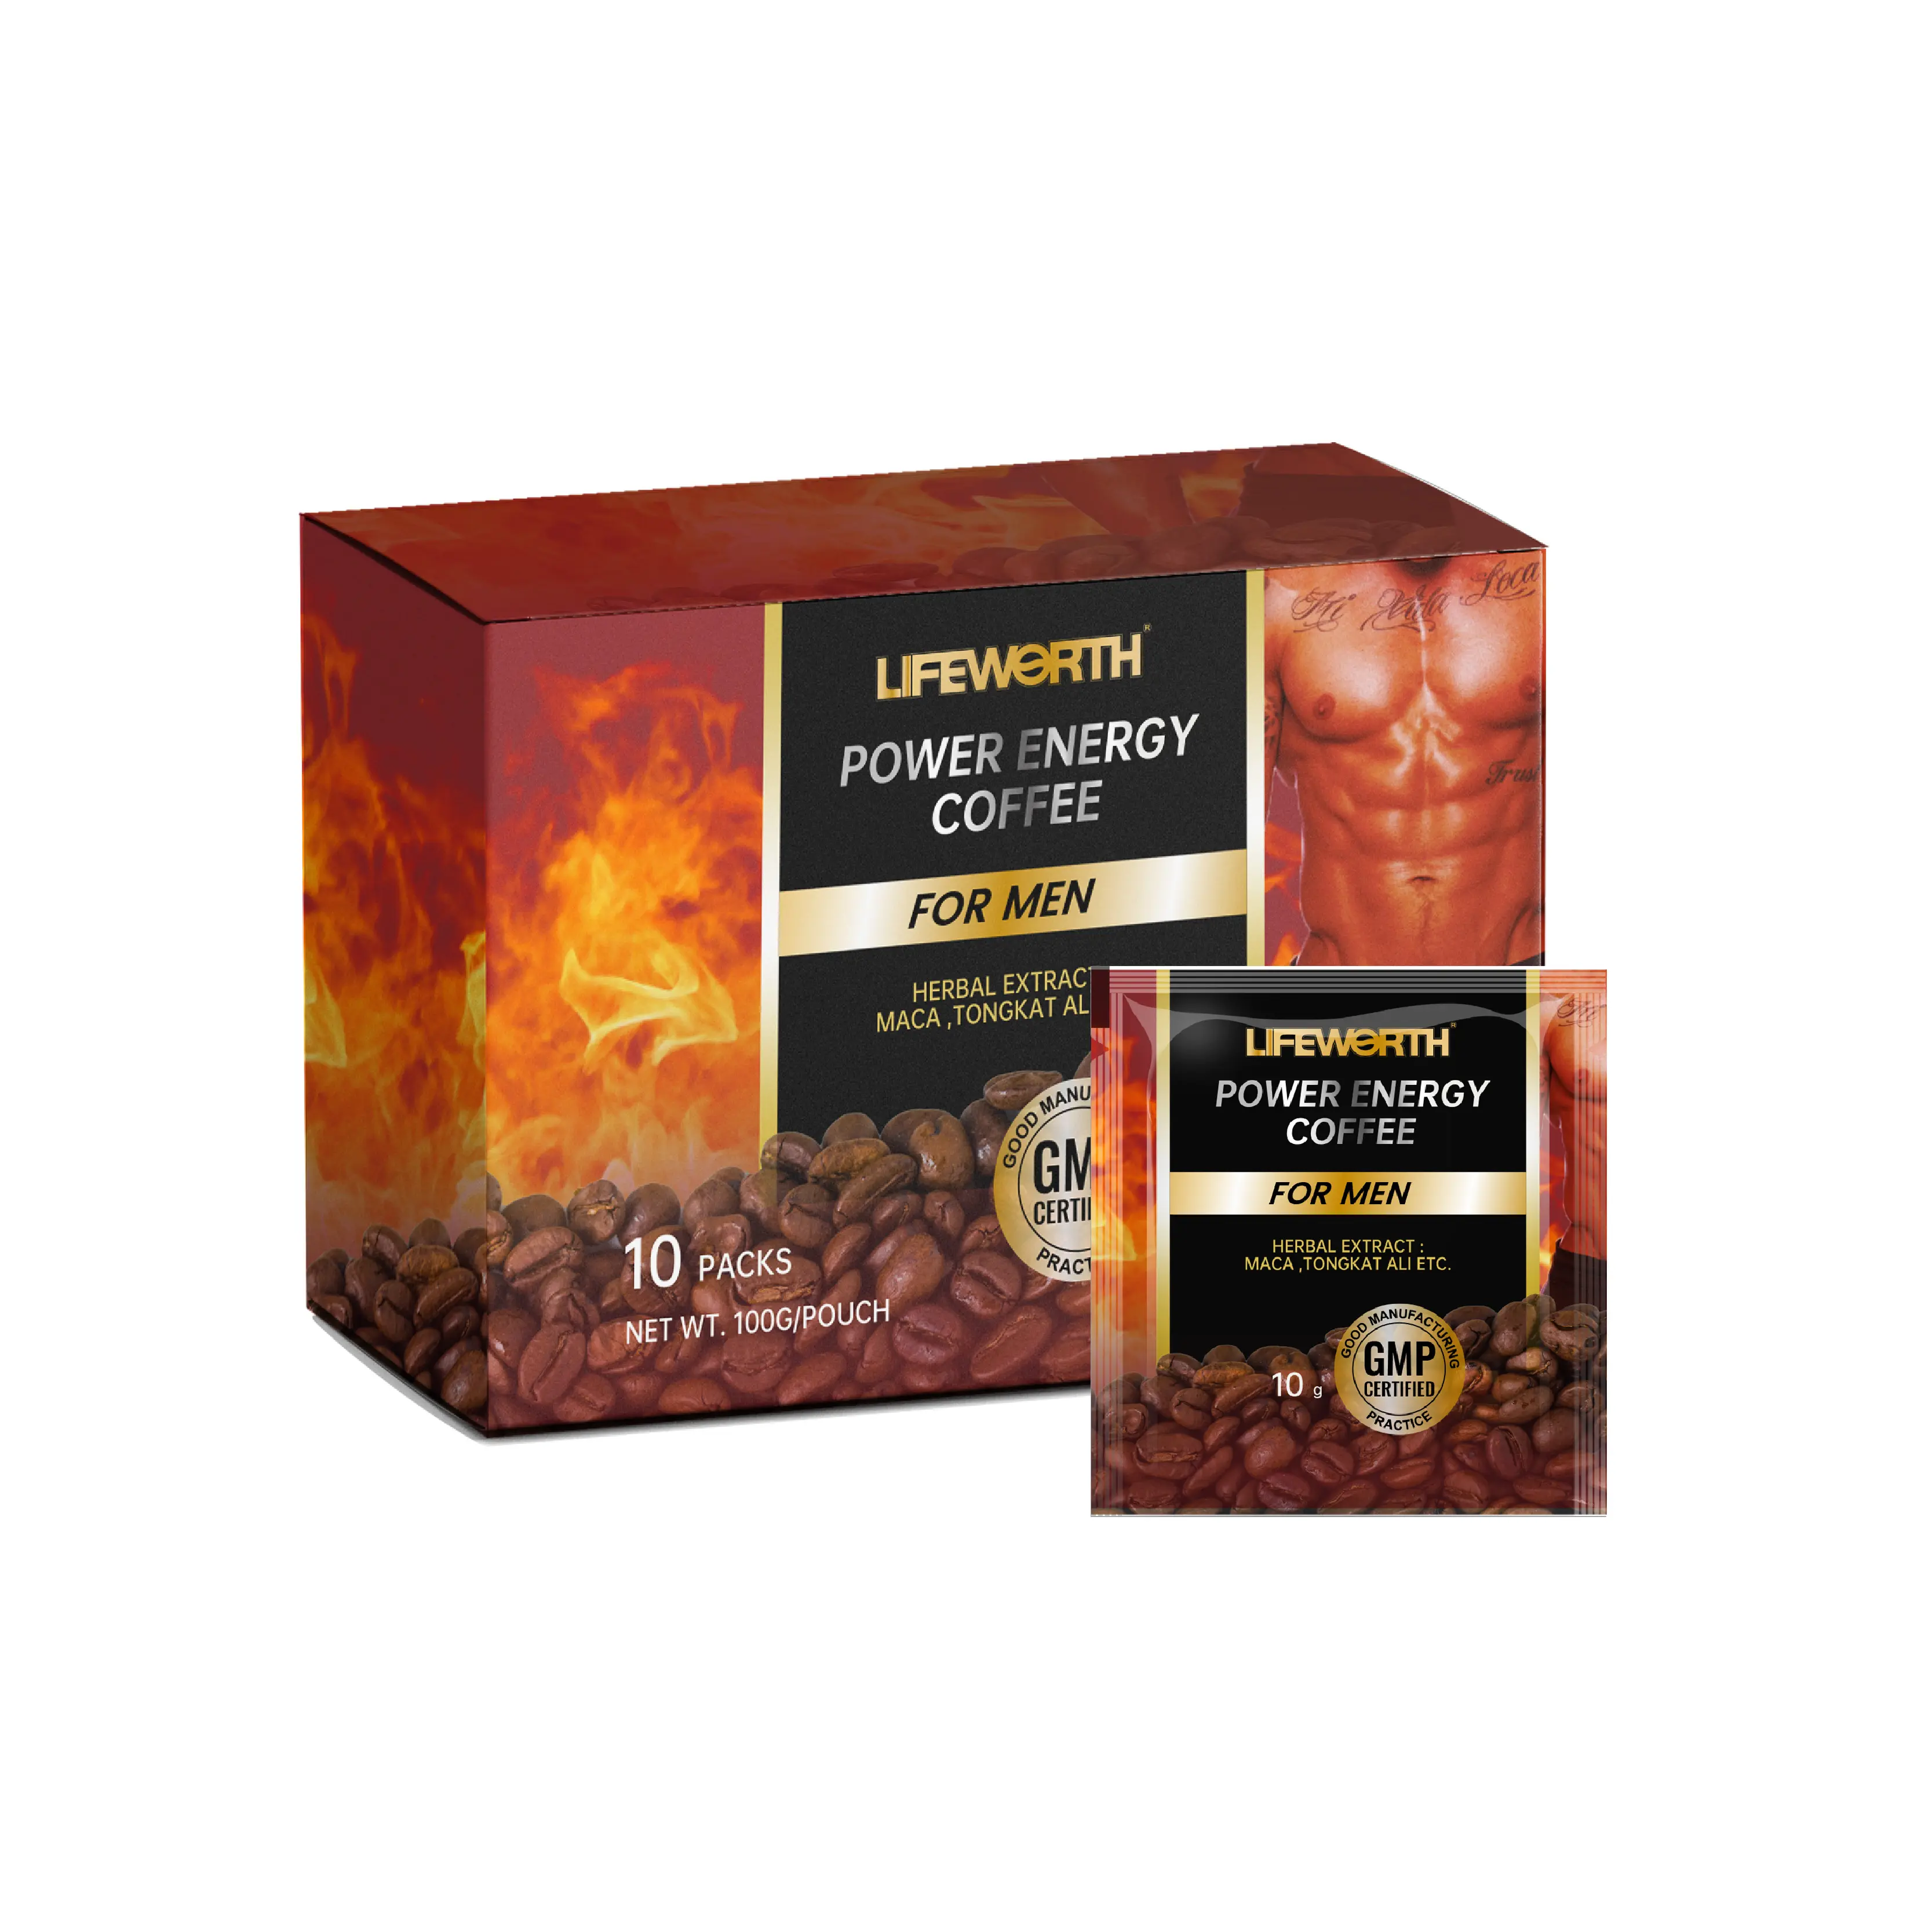 Lifeworth man power energy coffee male vitality health black instant Oyster Maca Extract coffee